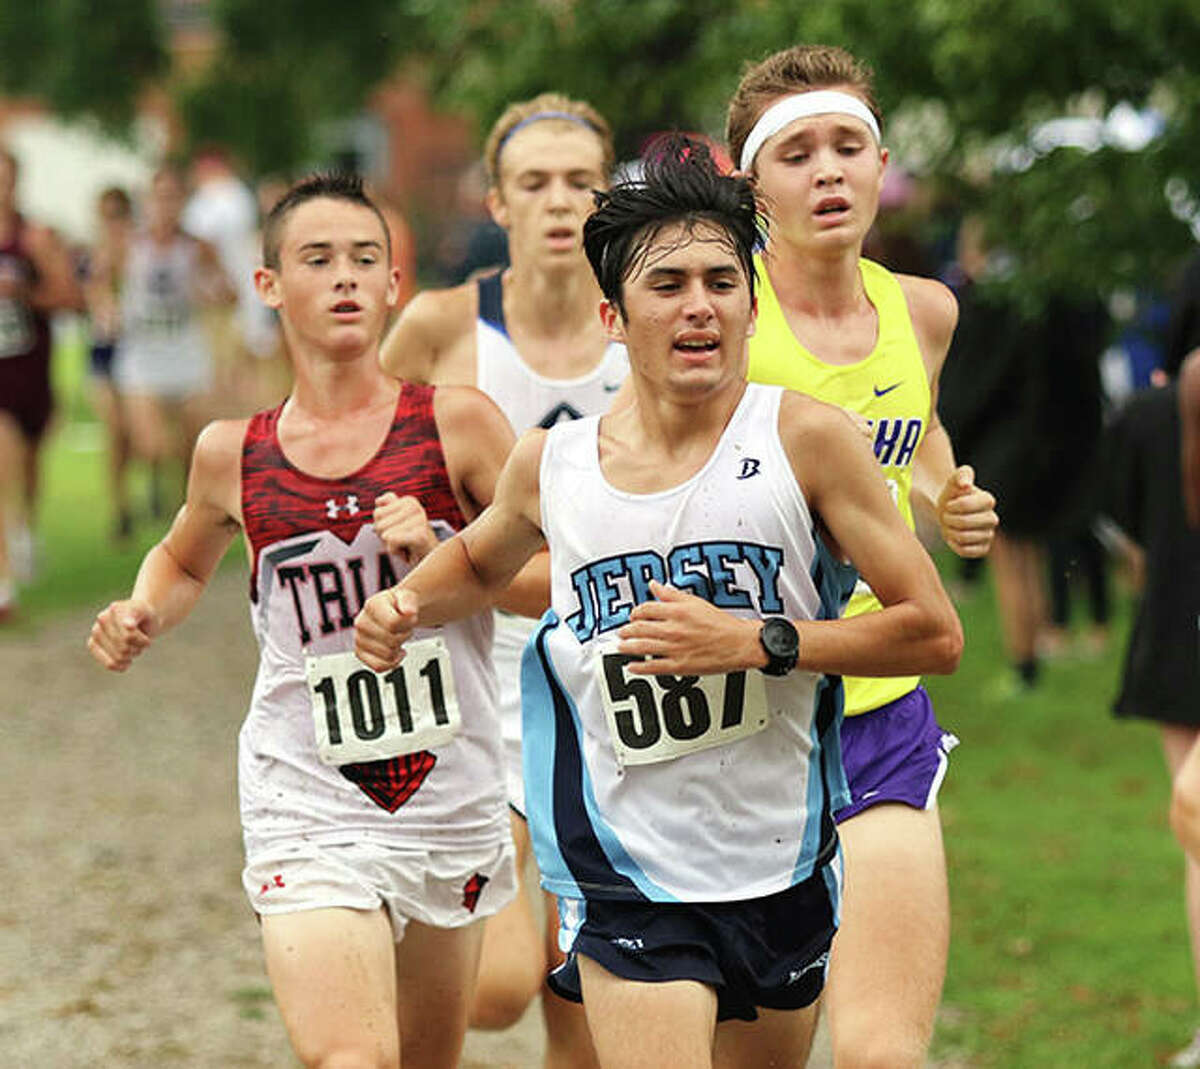 Jersey senior Cole Martinez (front) leads Triad sophomore Andrew Pace (1011) and Eureka senior Jake Brueggemann in the final 400 meters at Saturday morning’s Granite City Invite at Wilson Park. Martinez ran 16th in the race, with Pace in 14th and Brueggemann in 17th.